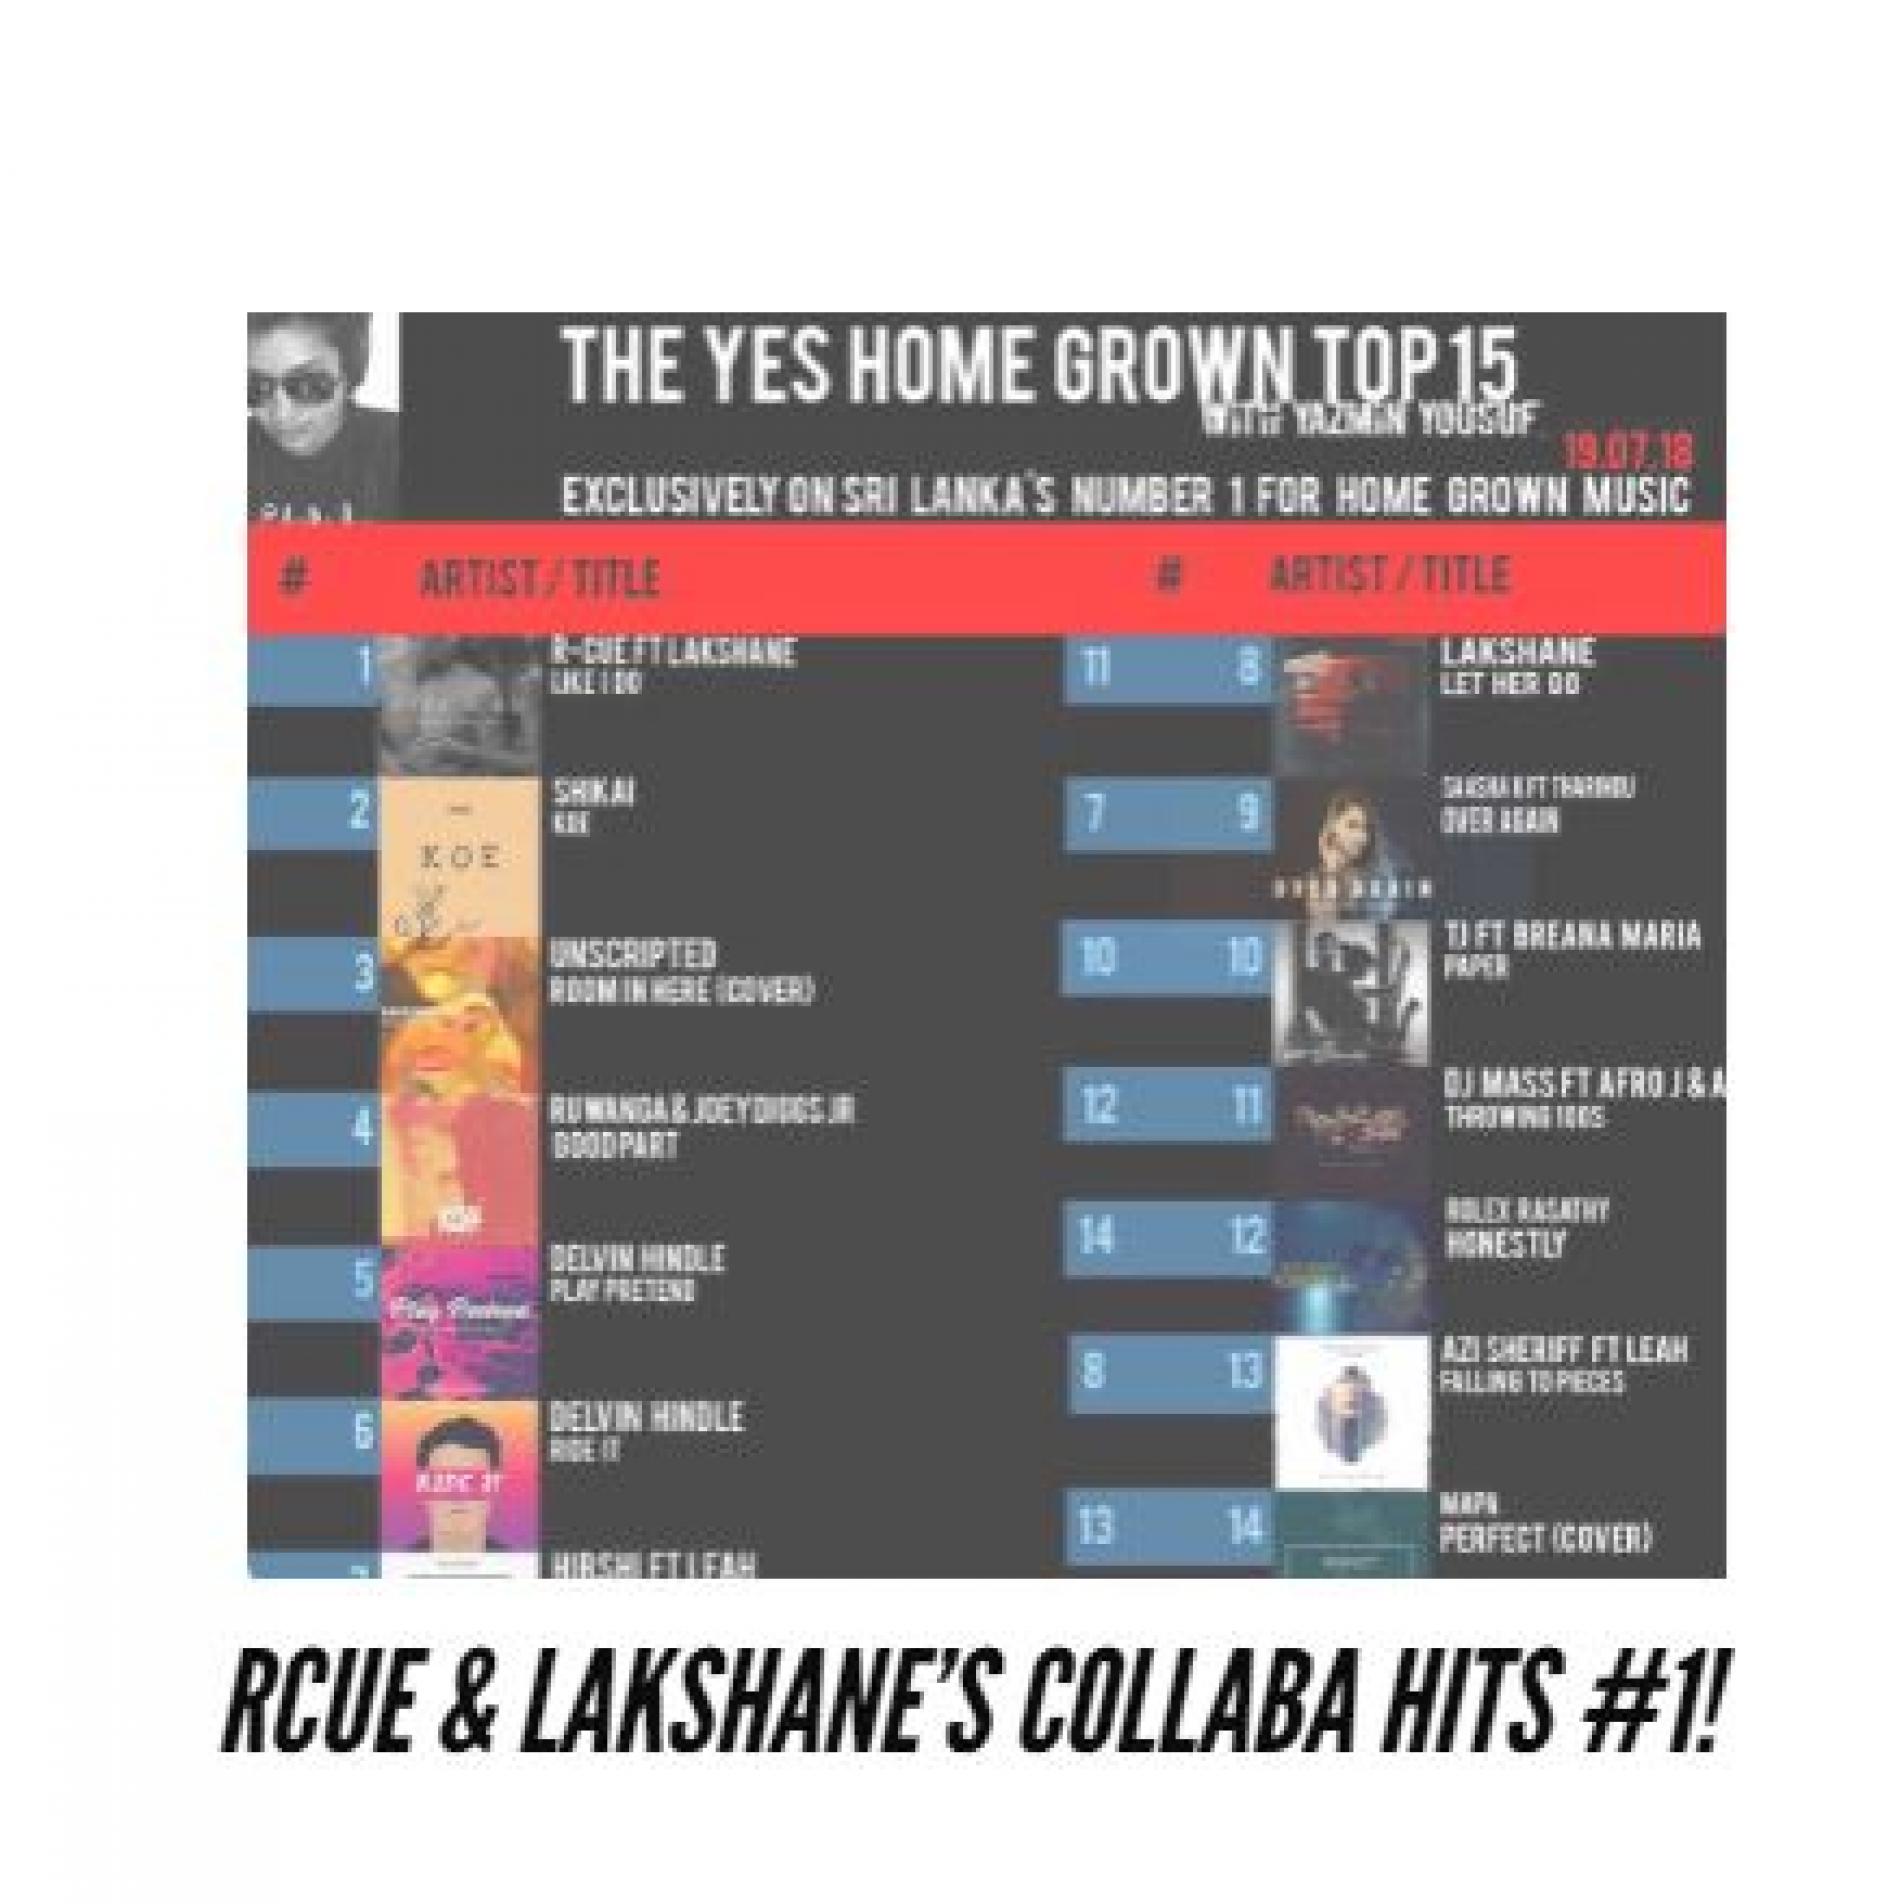 RCUE & Lakshane Top The YES Home Grown Top 15